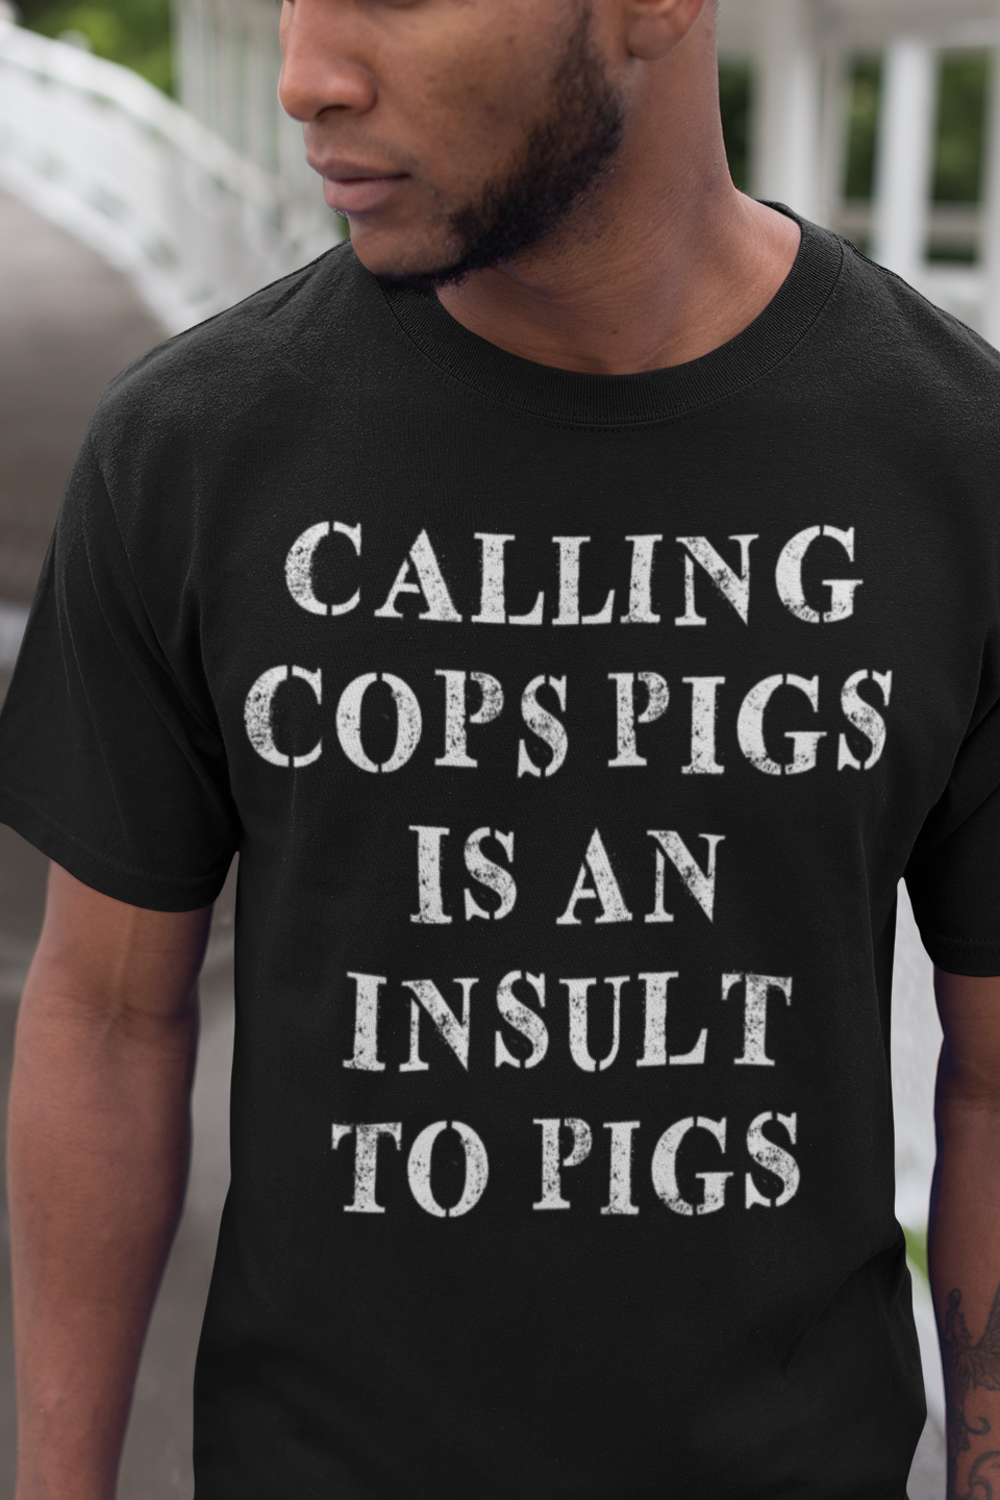 Calling Cops Pigs Is An Insult To Pigs Men's Classic T-Shirt